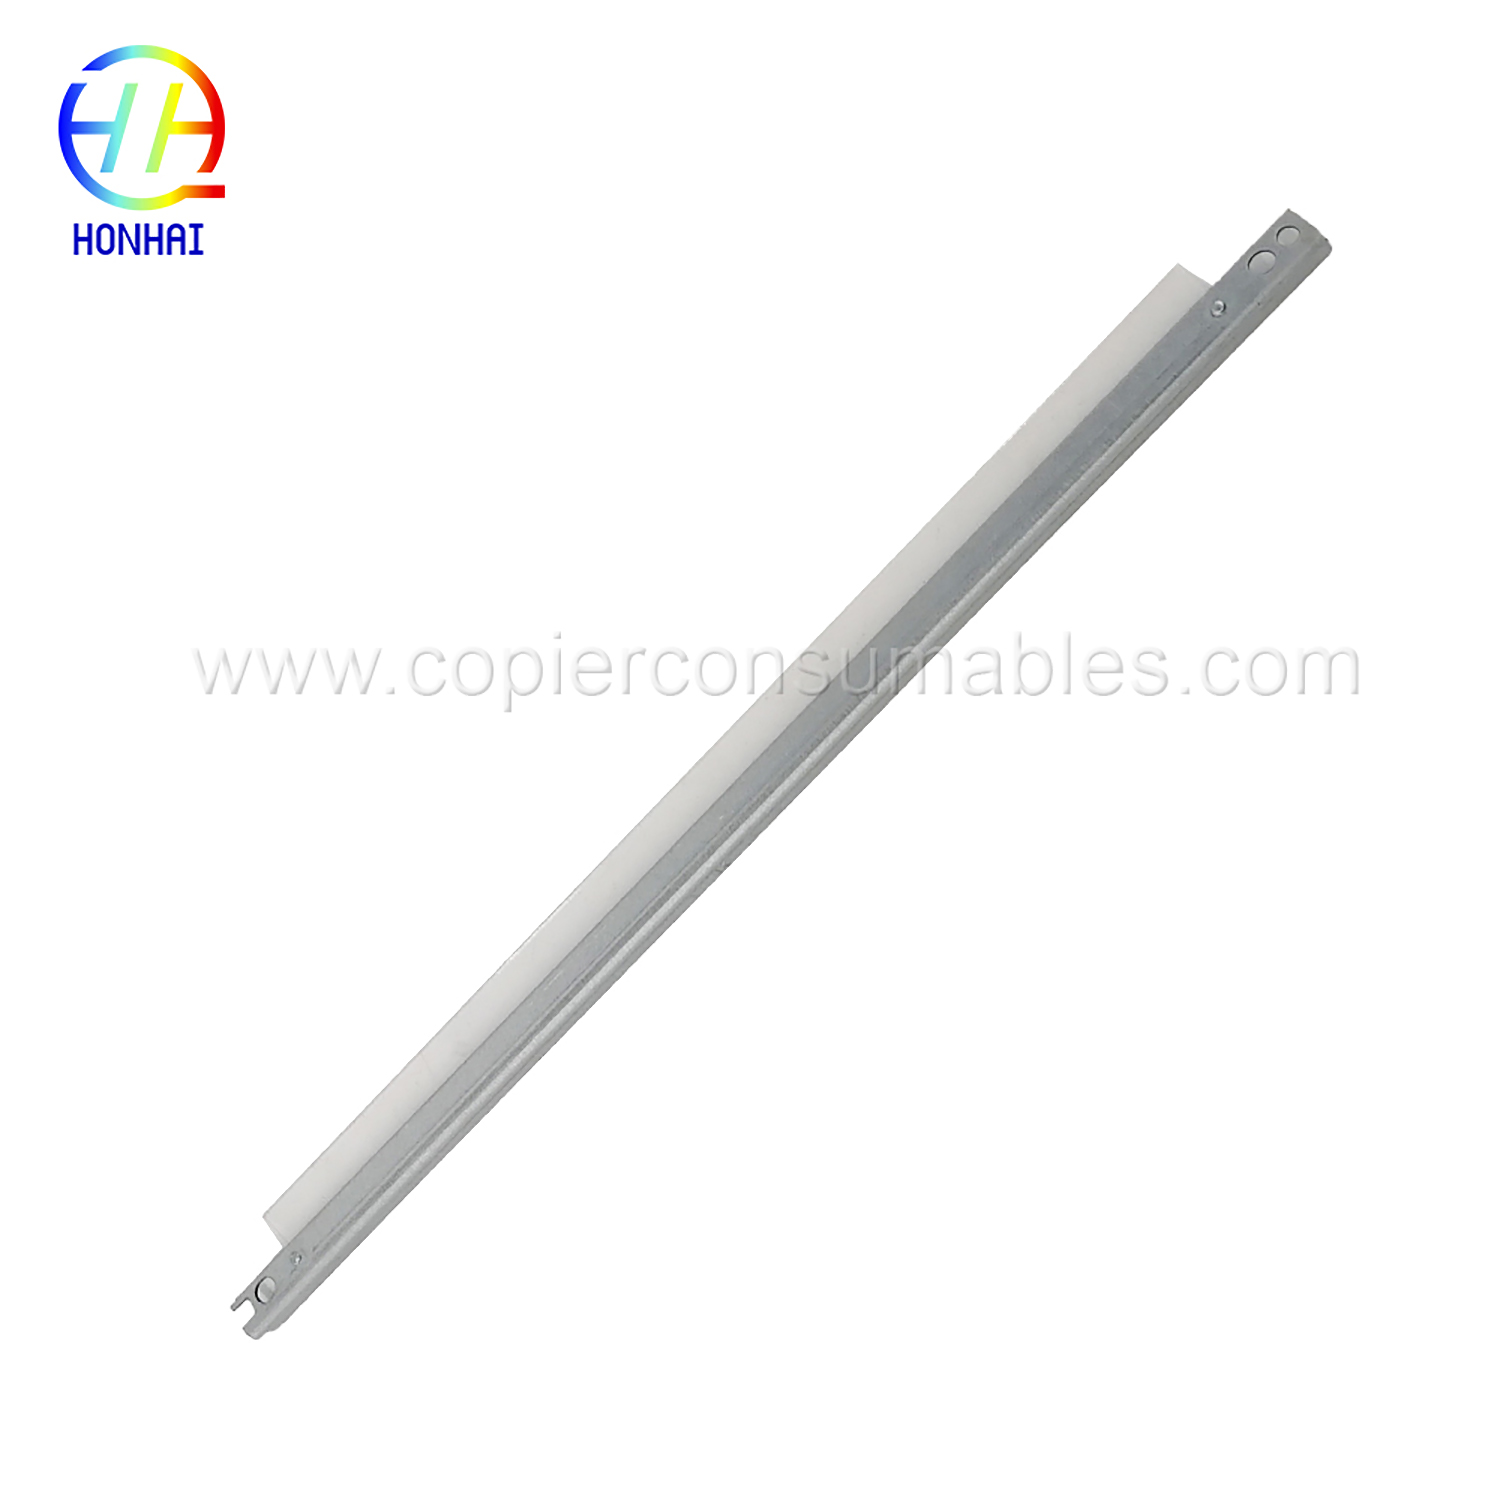 Drum cleaning blade for HP 1020 M1319 3015 3020 3030 3052 3050 3055 1010 1020 1022 M1005 (3) 拷贝